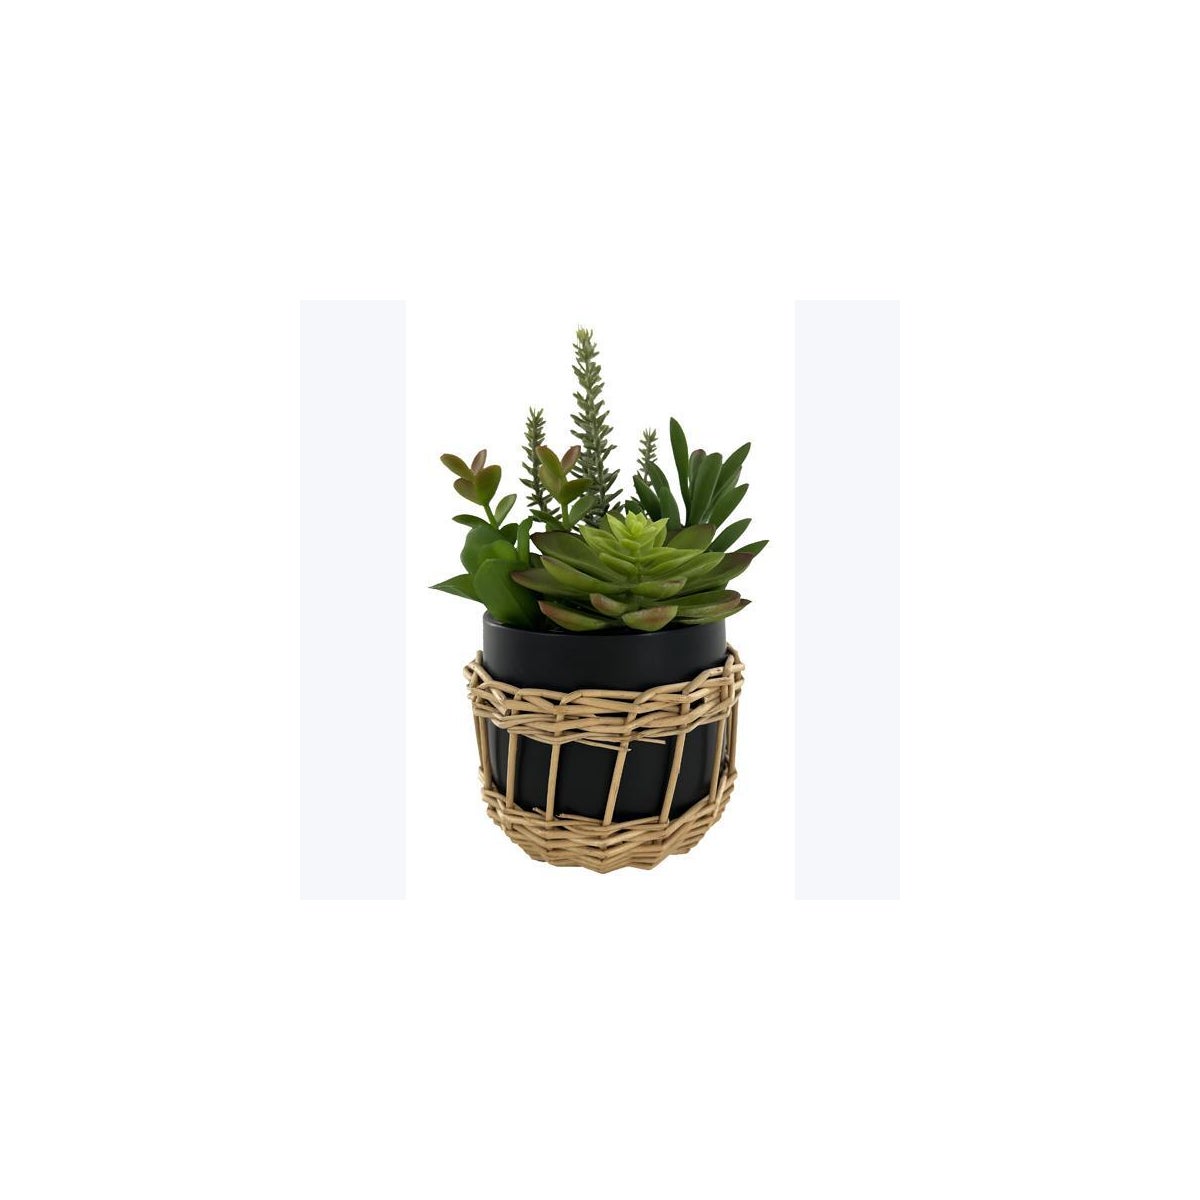 Artificial Mix Succulent in Ceramic Pot with Basket Cover